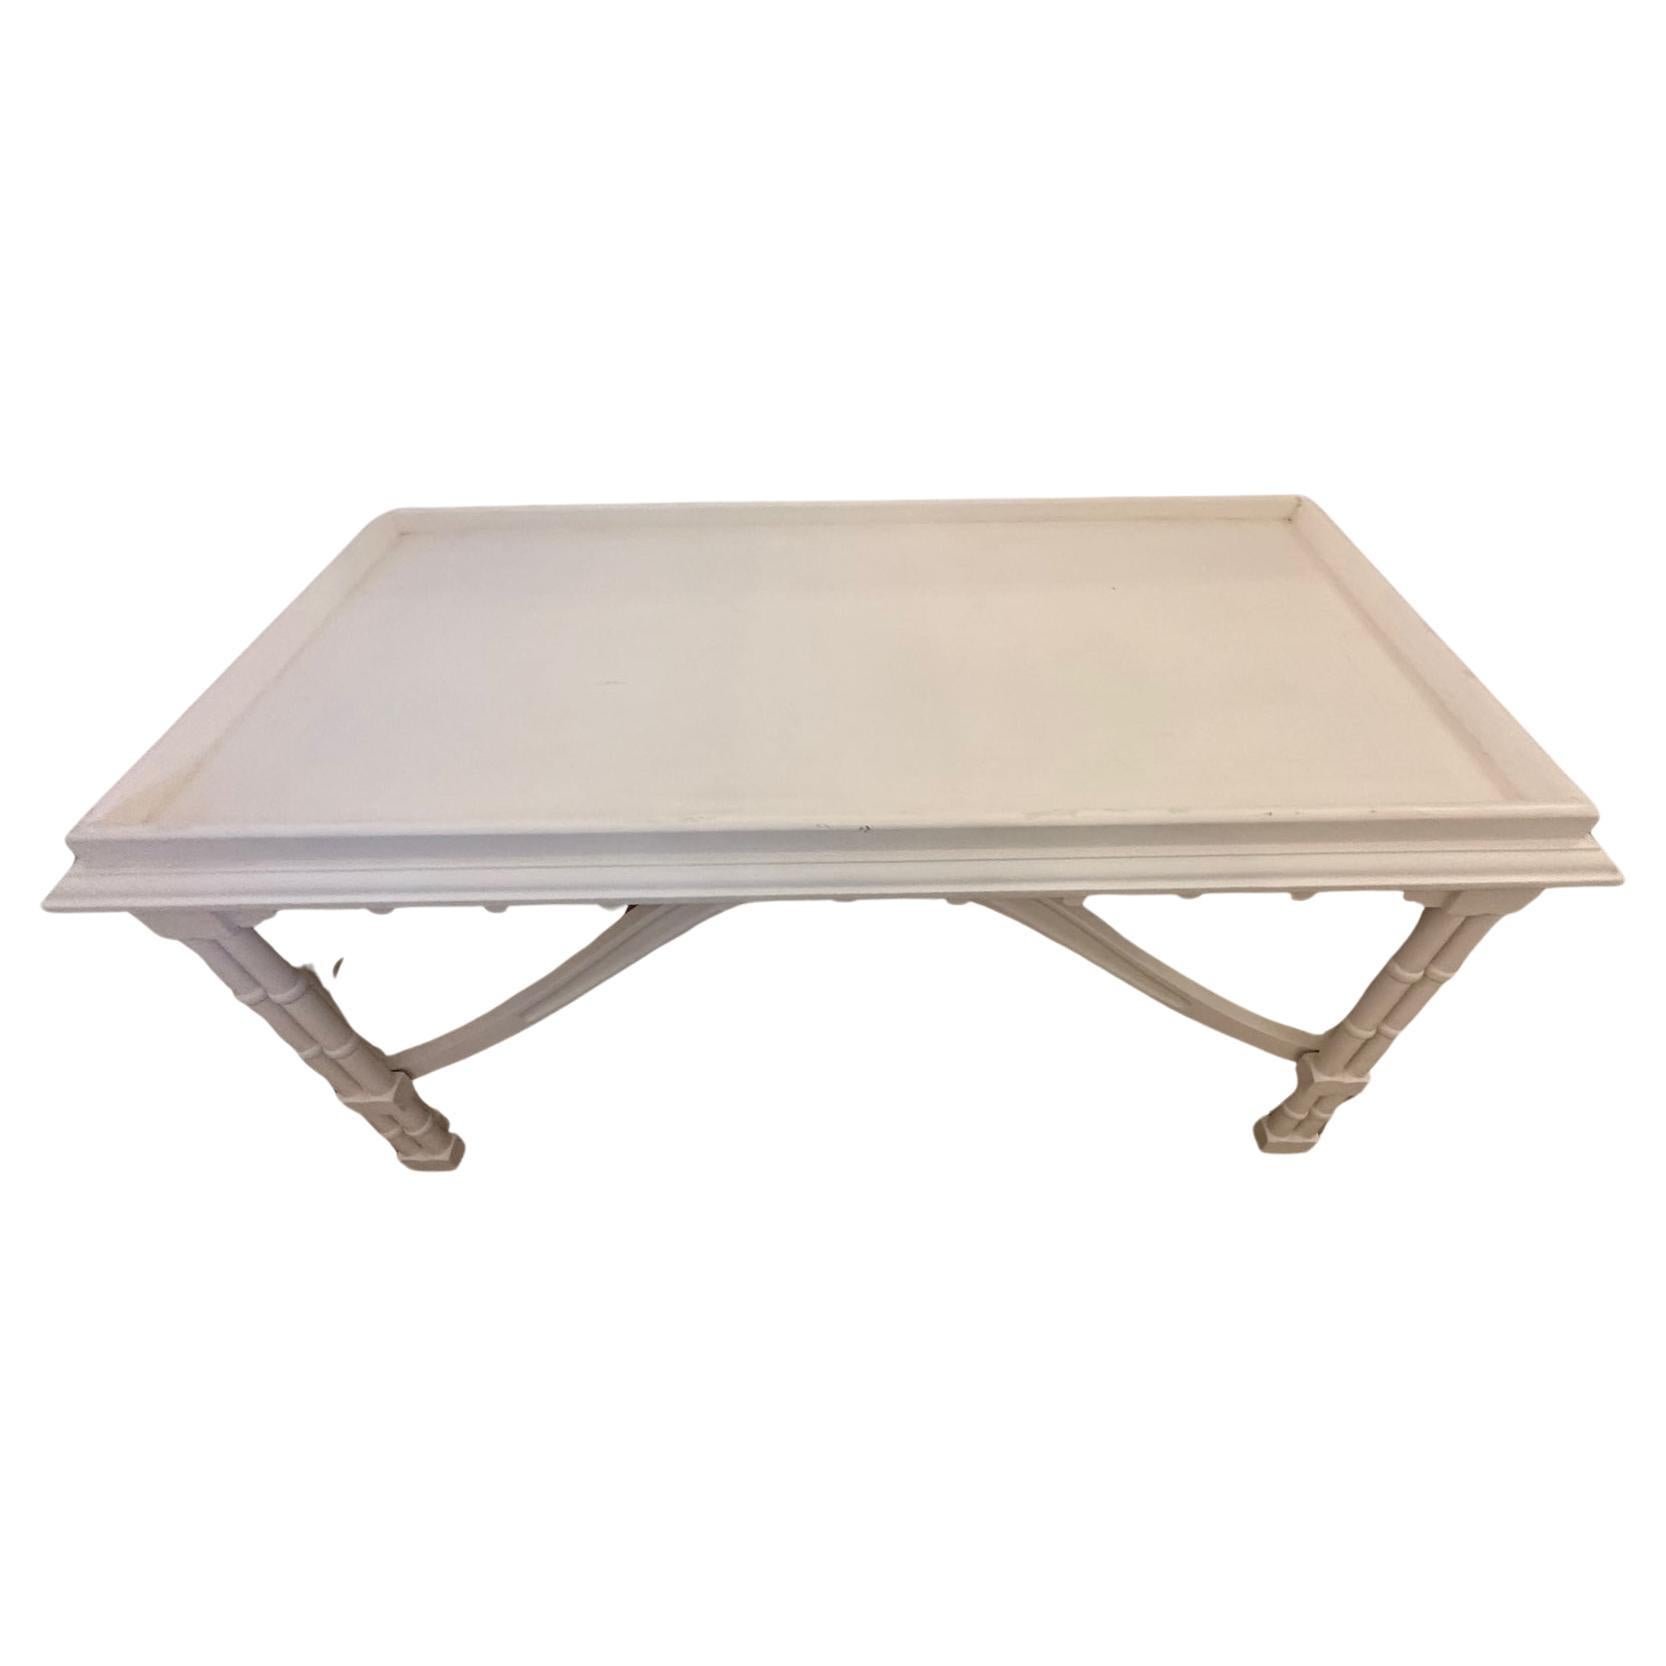 Very pretty vintage Gothic Revival coffee table that's been updated with a fresh coat of white paint.  The scalloped underside and central finial in the undulating stretchers are superb.